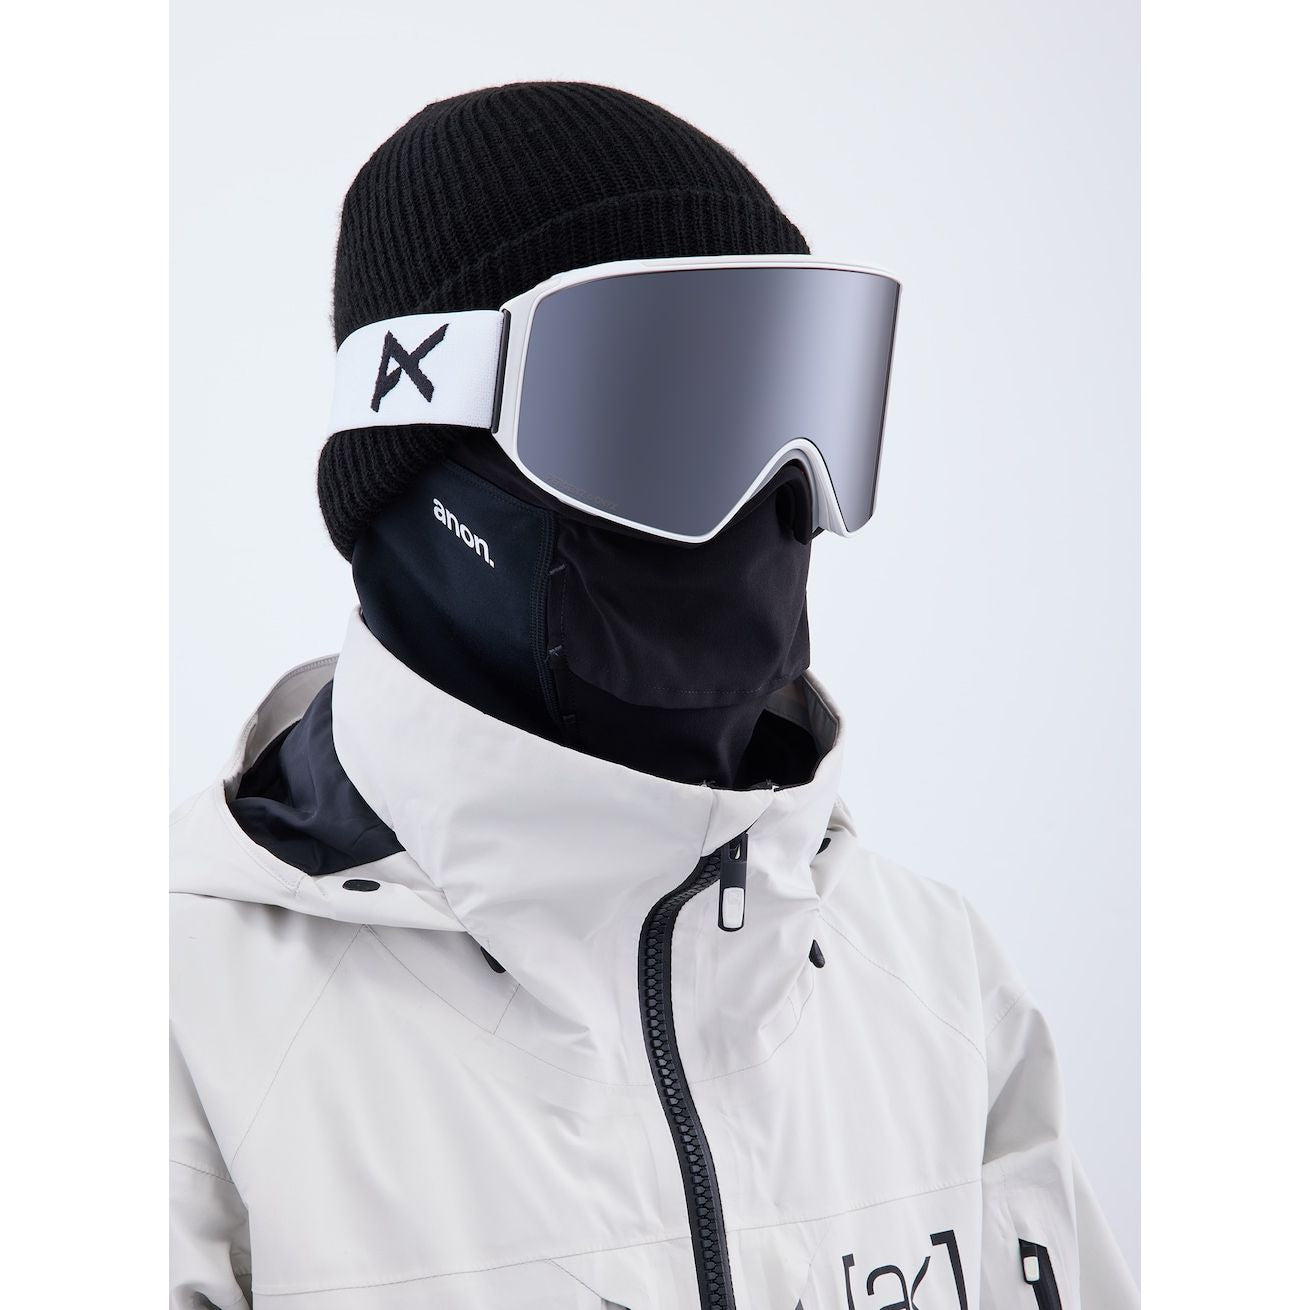 Anon M4 Cylindrical Goggles + Bonus Lens + MFI Face Mask - Low Bridge Fit White / Perceive Sunny Onyx Snow Goggles